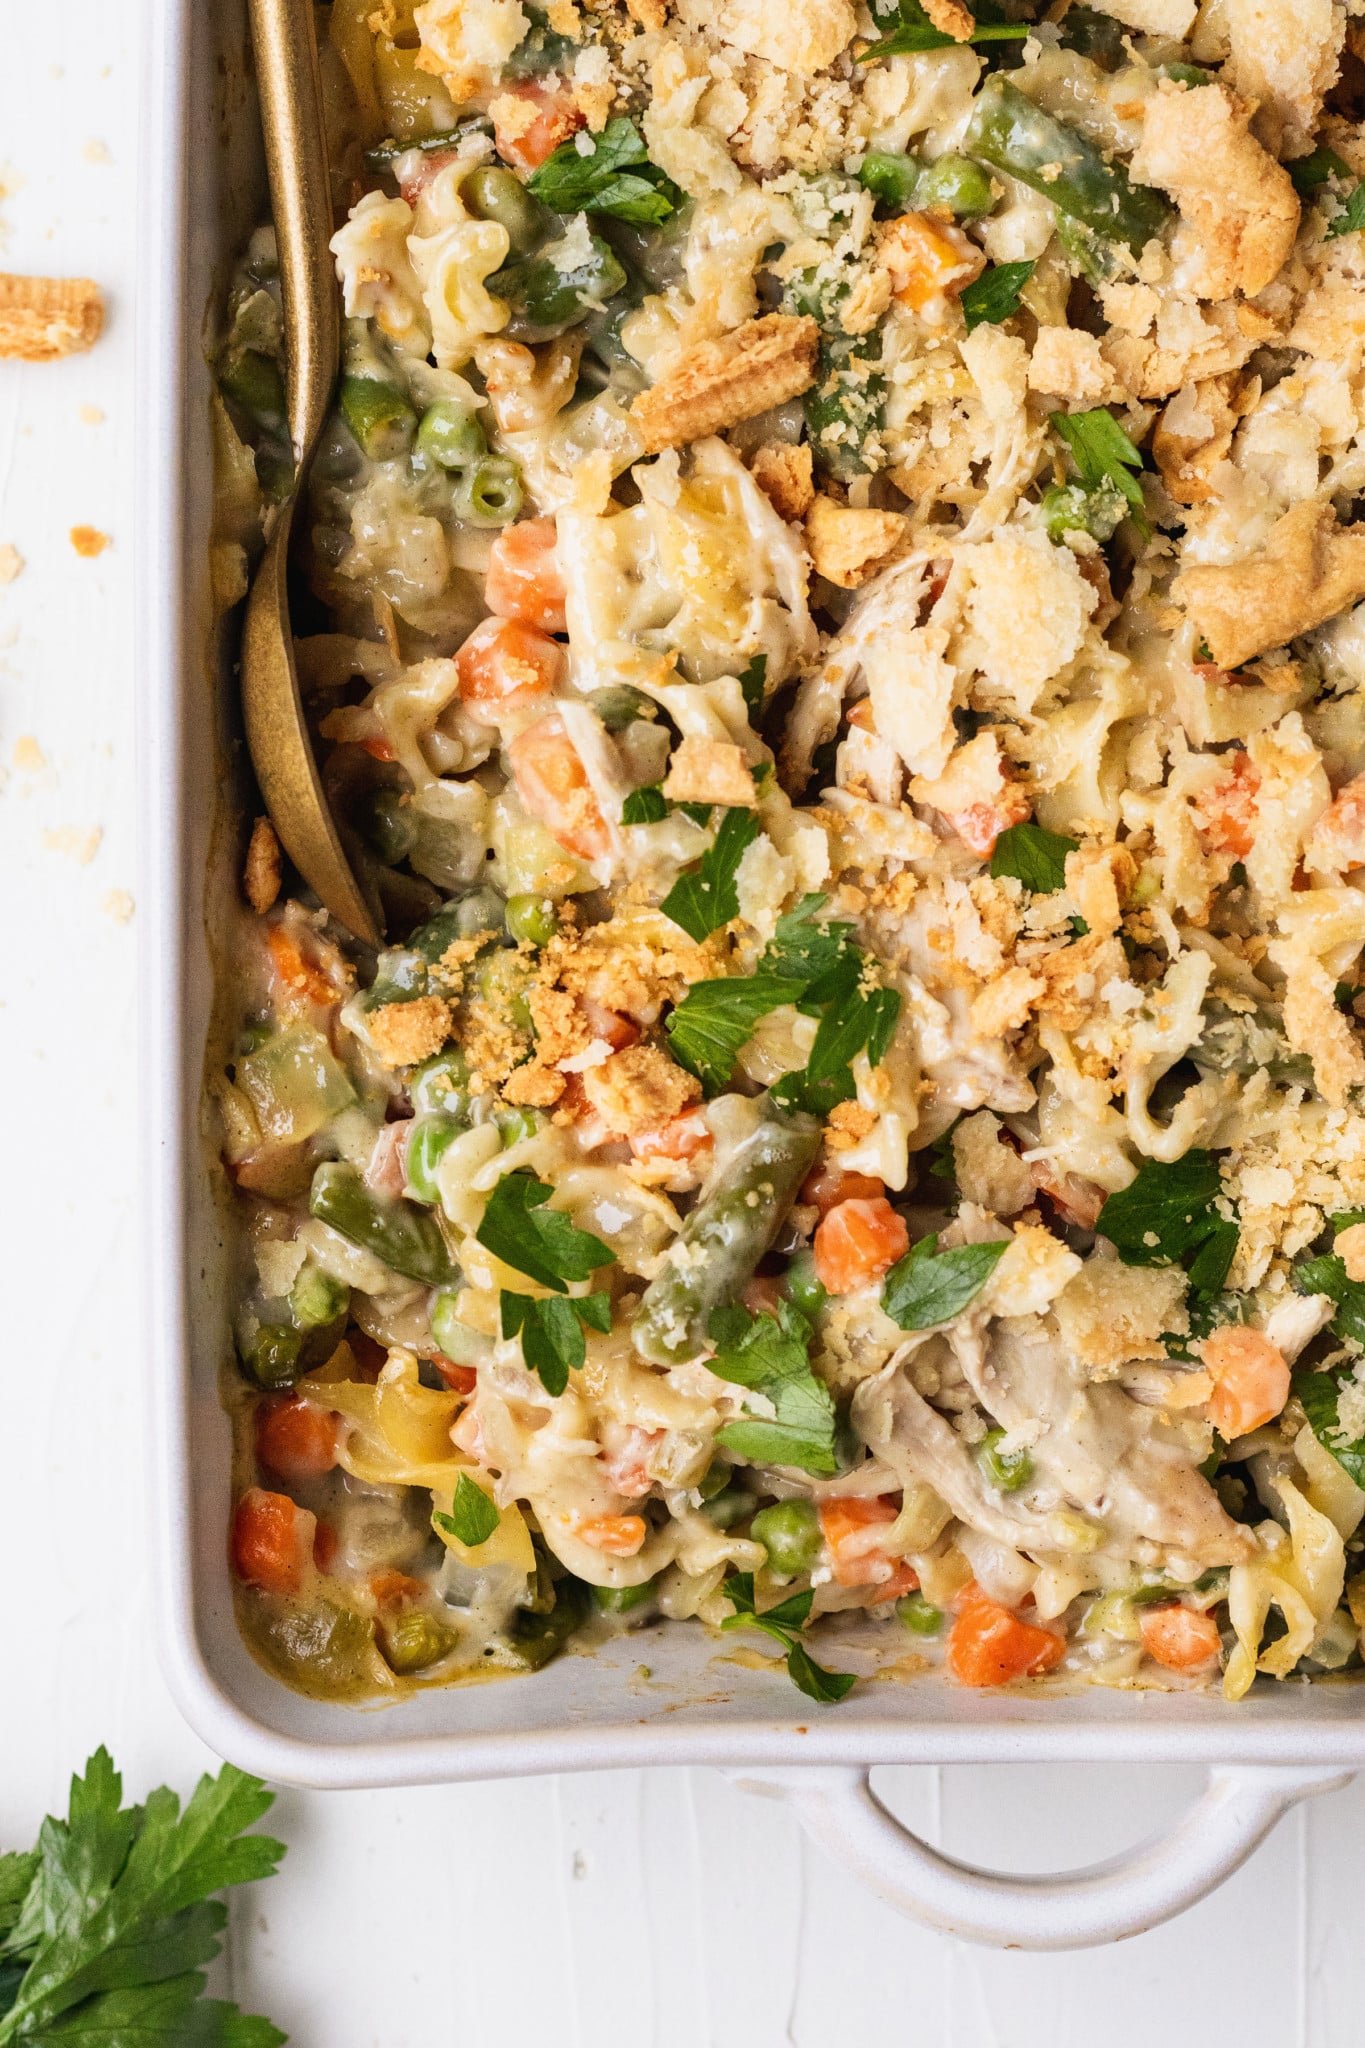 an up close image of a casserole loaded with egg noodles, carrots, green beans and topped with pie crust and parsley